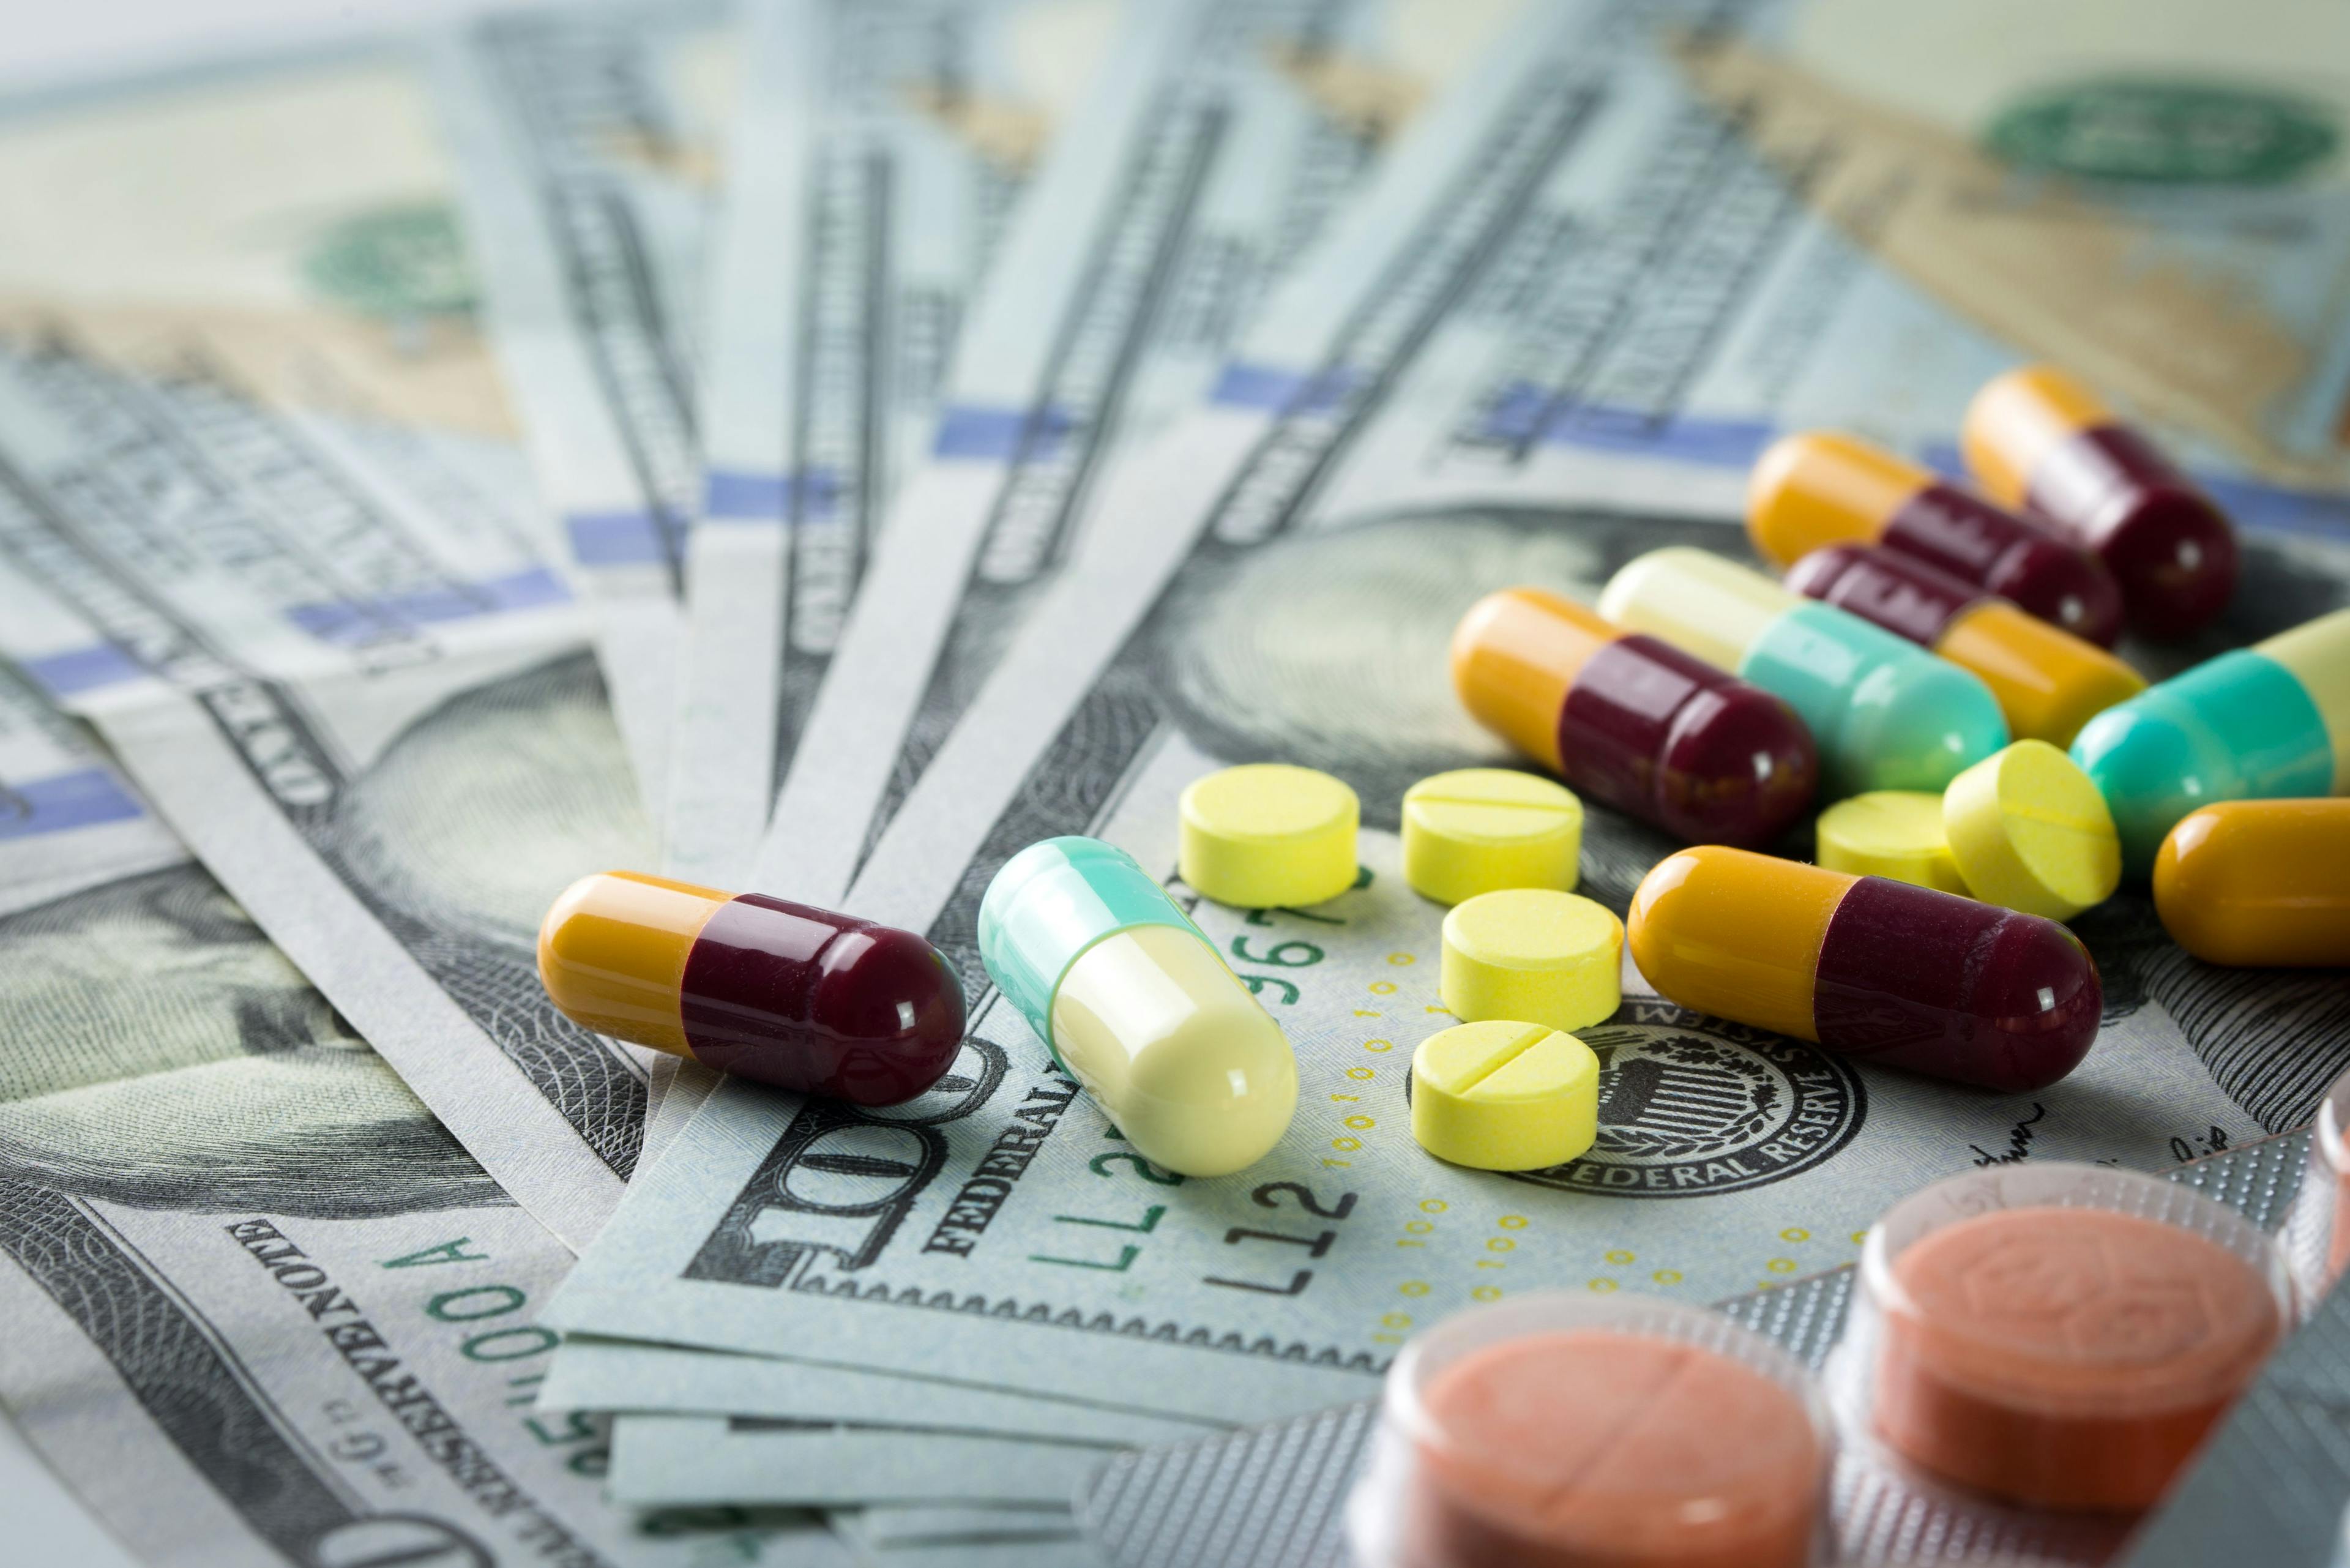 For the First Time Medicaid Net Drug Spending Hits Double-Digits